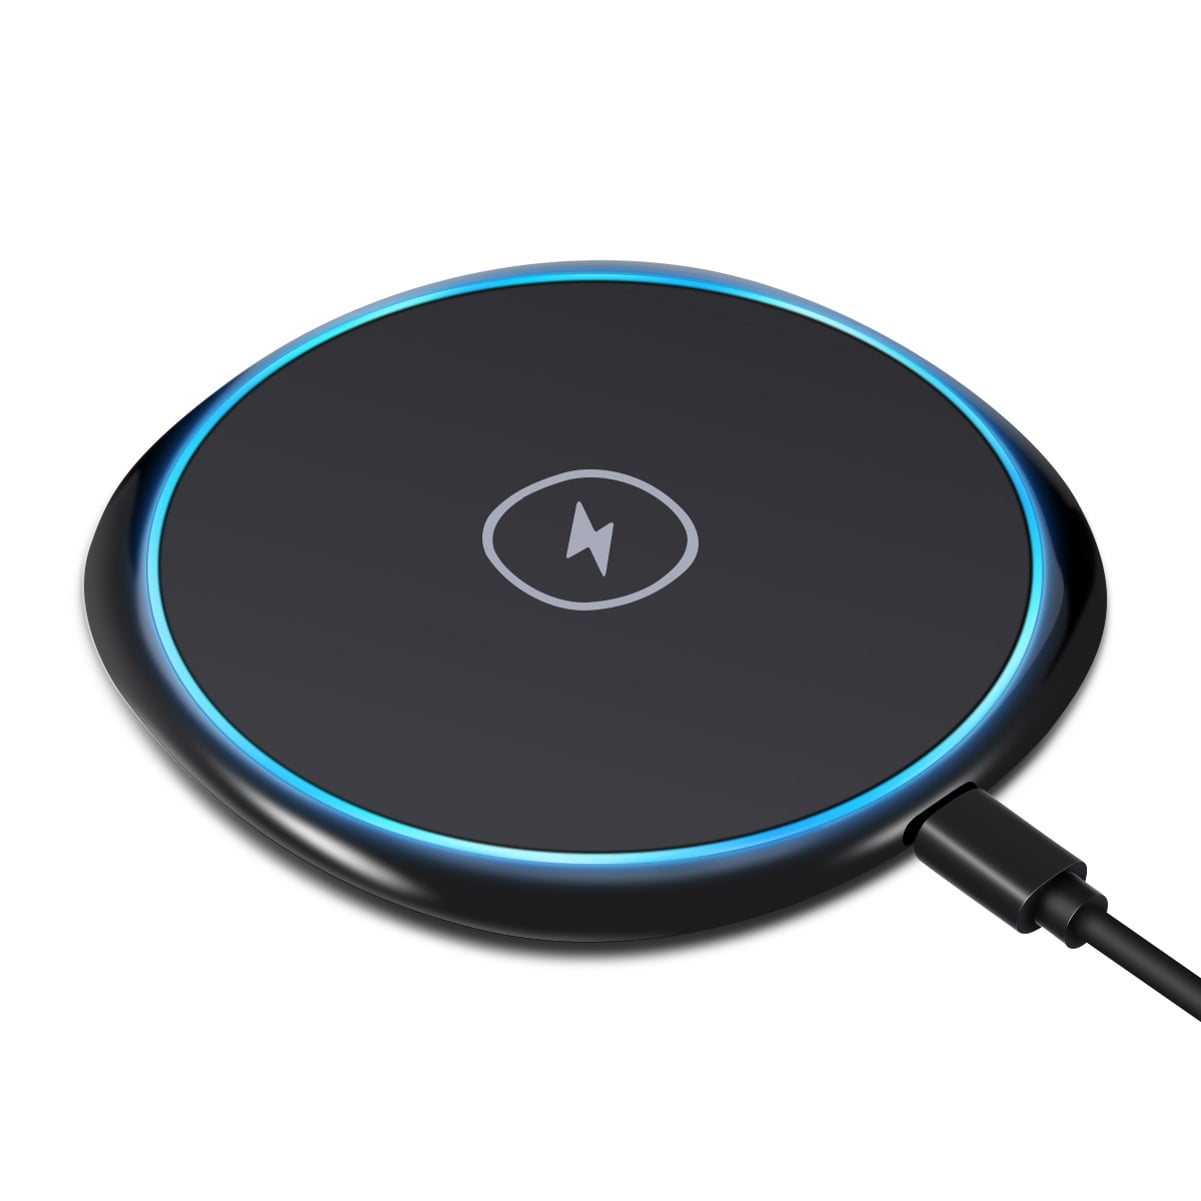  and 10W Wireless Charger Ultra Slim Fast Charging Pad E2G for Huawei P30  Pro, Mate 20 Pro - Kyocera Hydro Elite C6750 - LG G2 G3 G4 G6, V30 V50 ThinQ